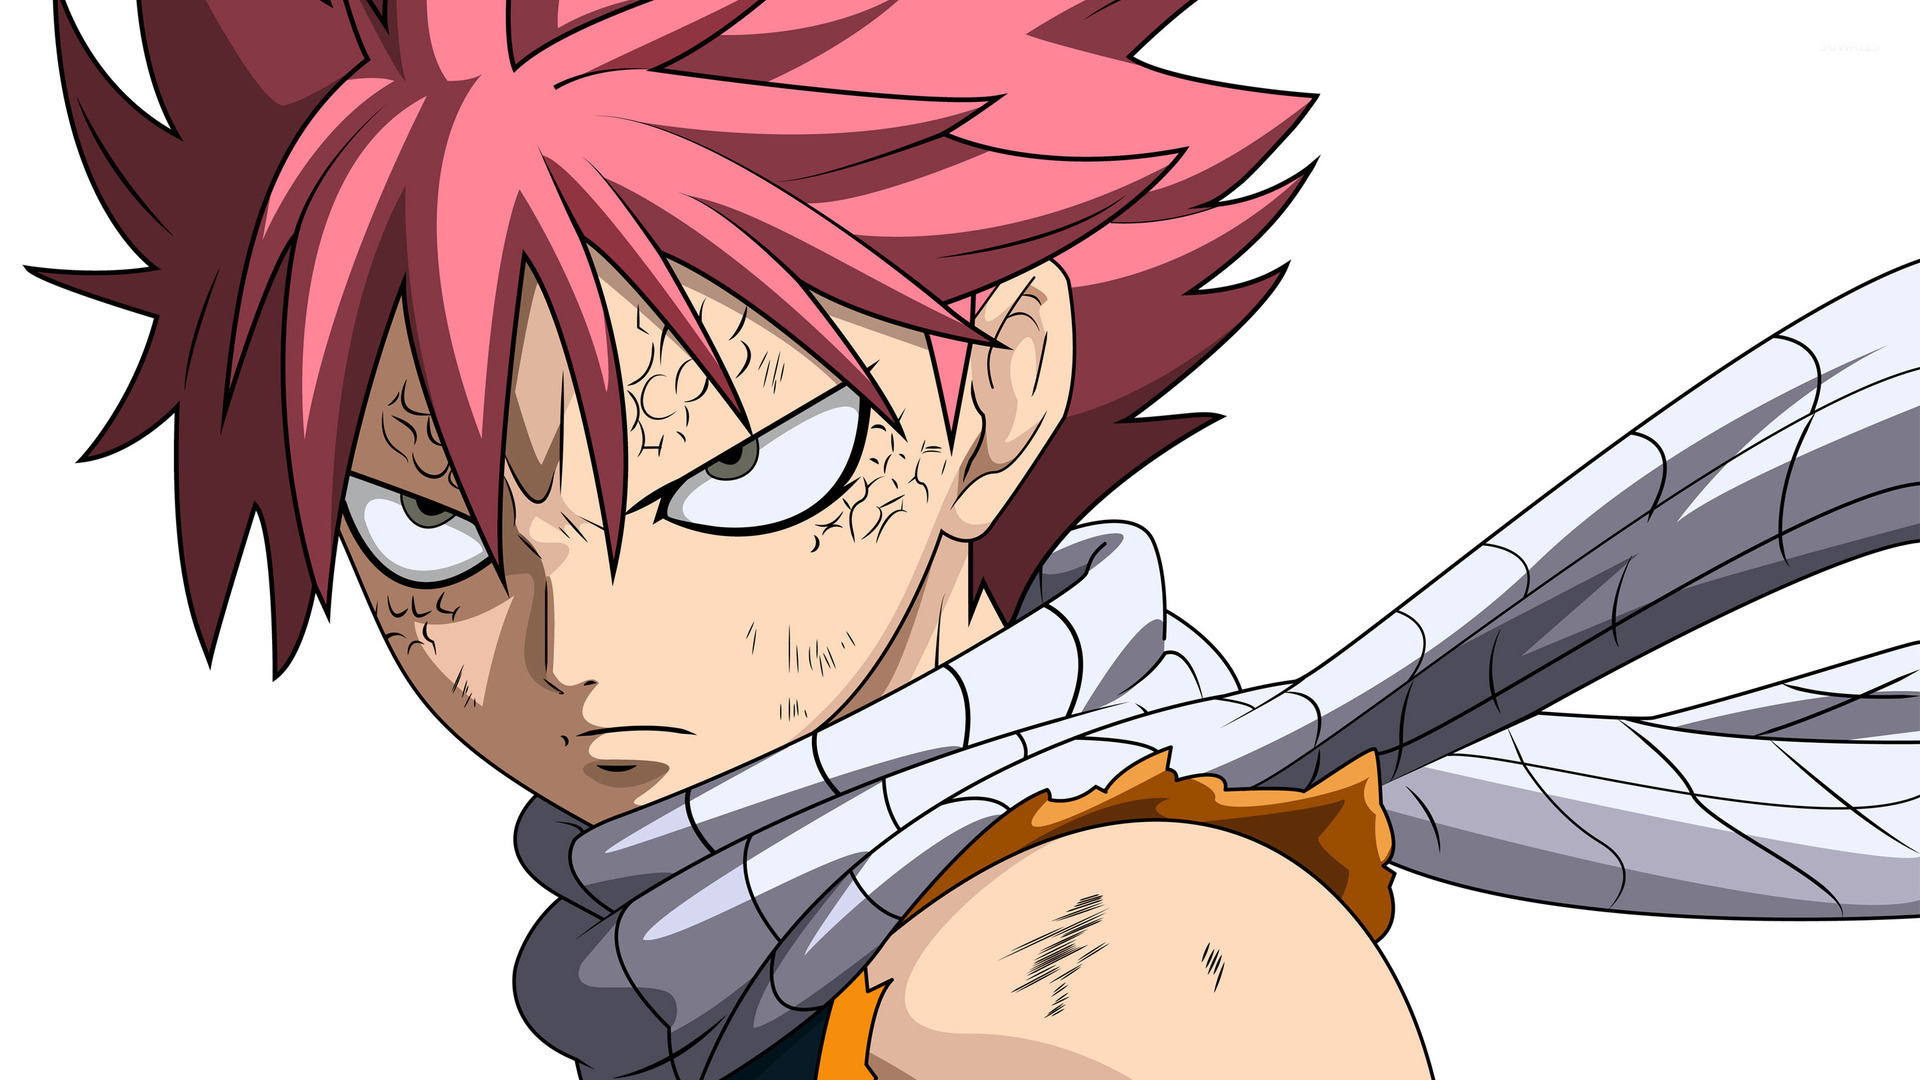 2. Natsu Dragneel from Fairy Tail - wide 9